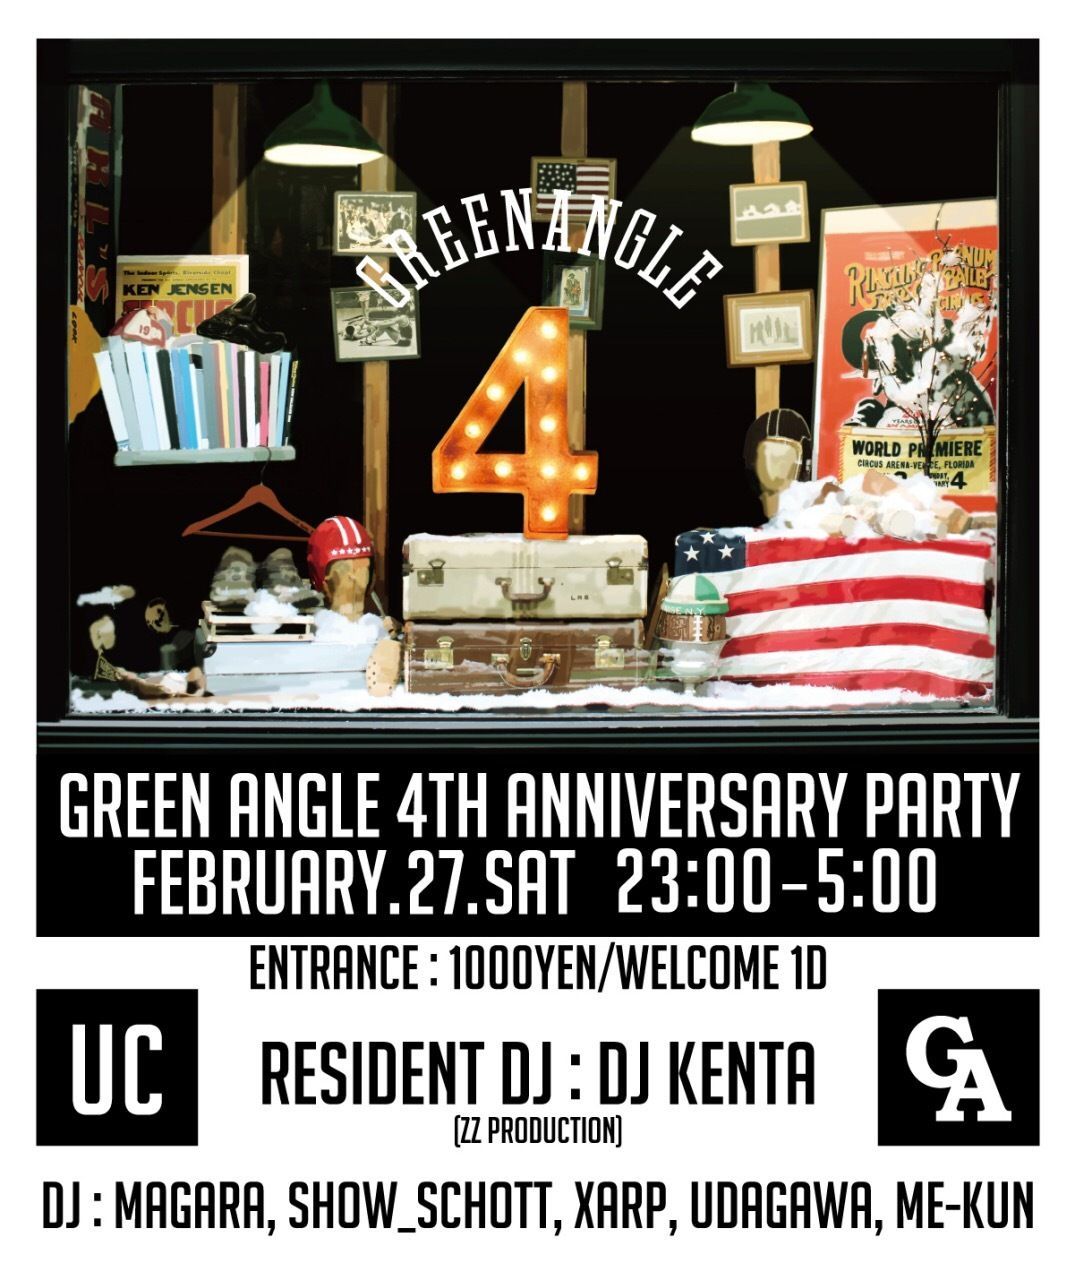 Green Angle 4th Anniversary Party